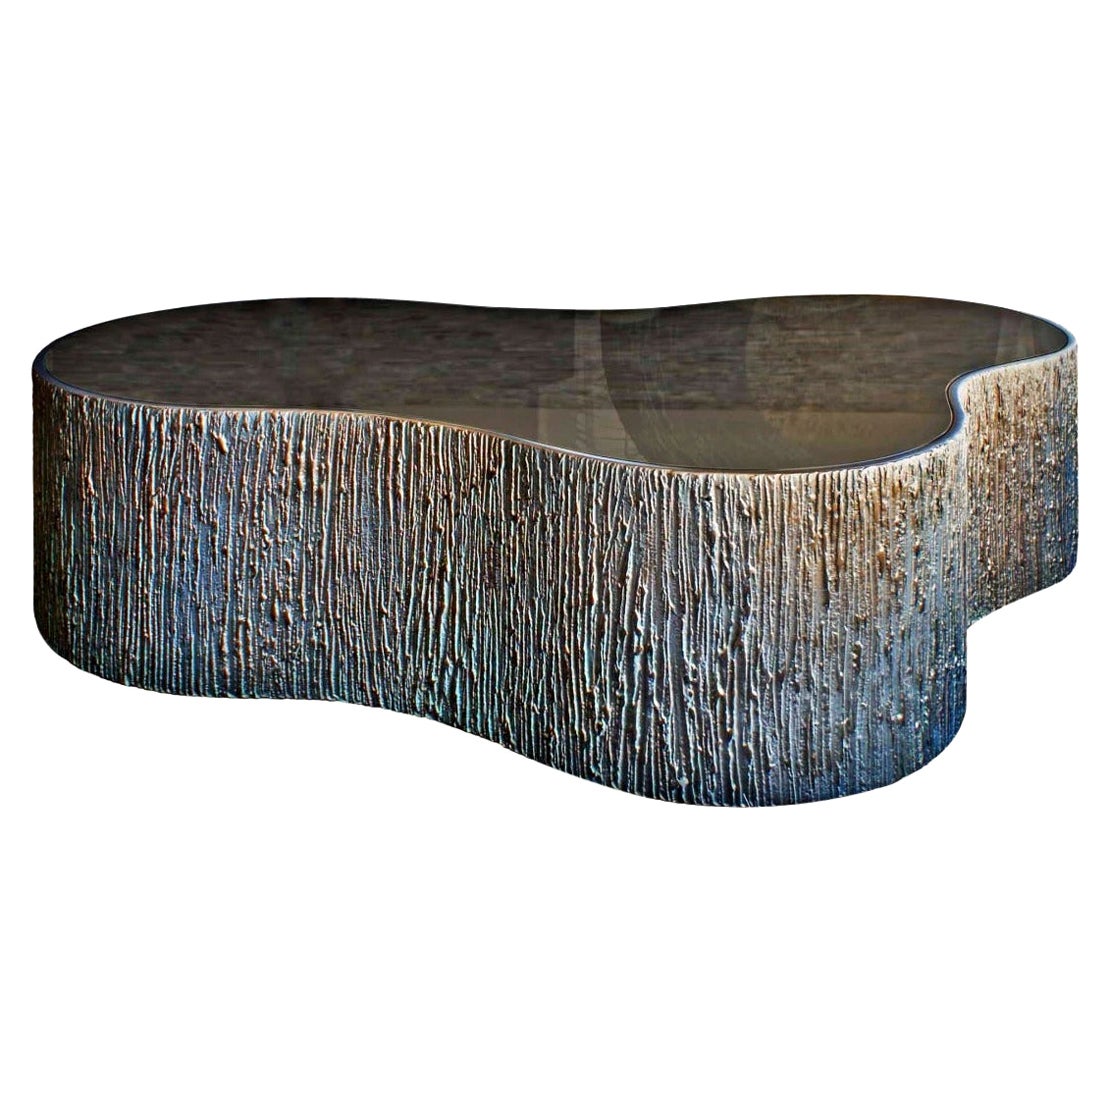 New Design Coffee Table in Bronze Mirror Thick, with Polished Edge